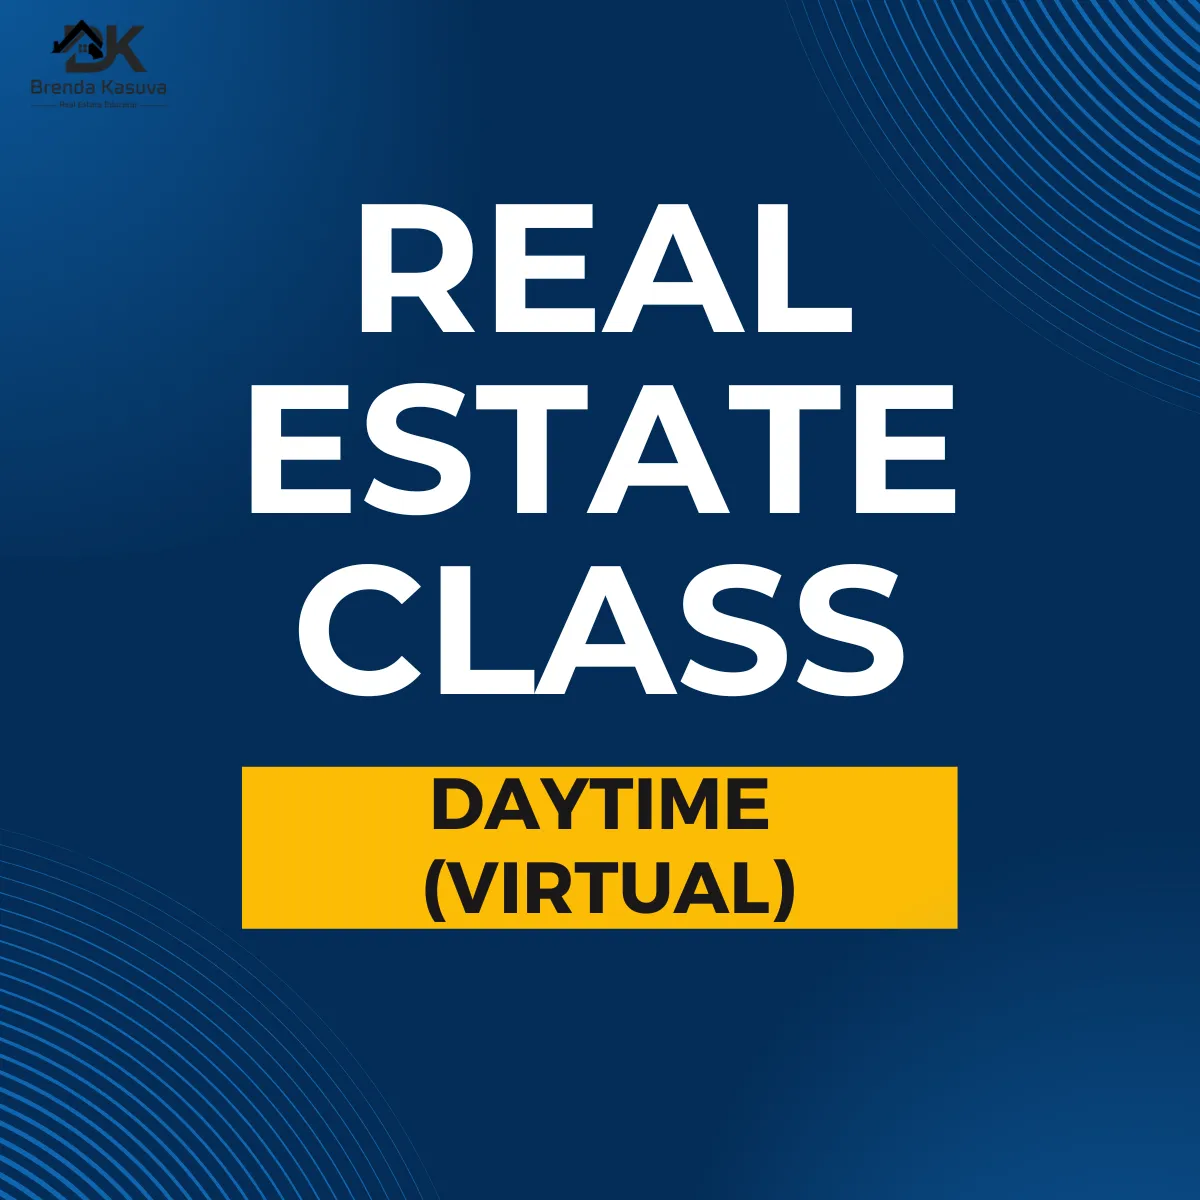 Maryland Real Estate class - Daytime VIRTUAL